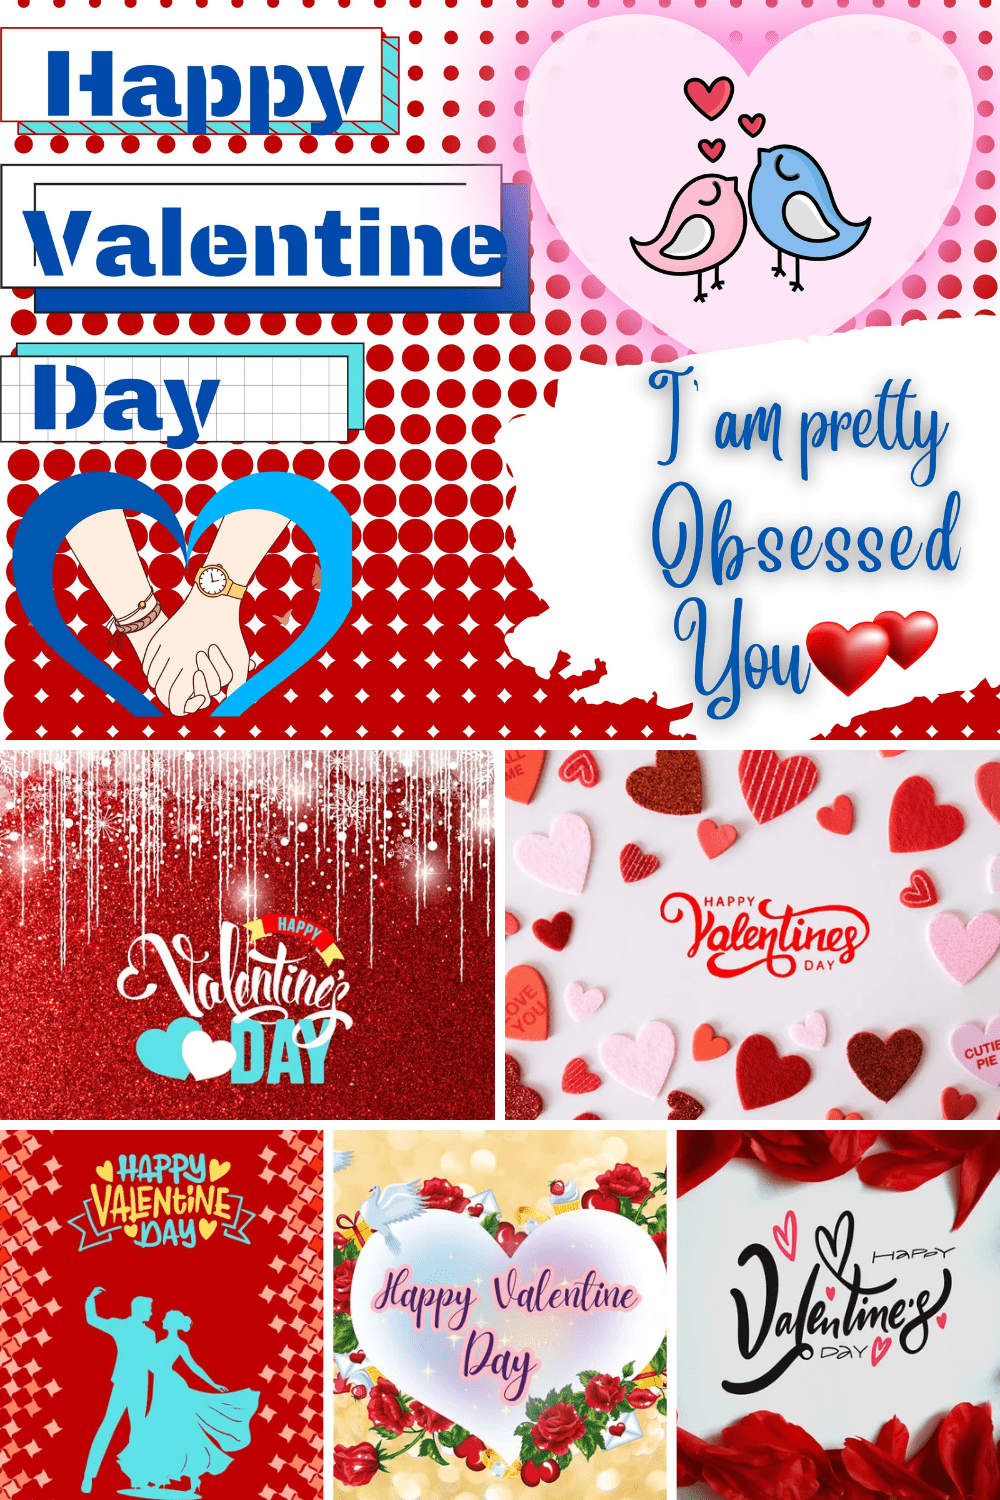 26 Happy valentine day vactor images pinterest preview image.